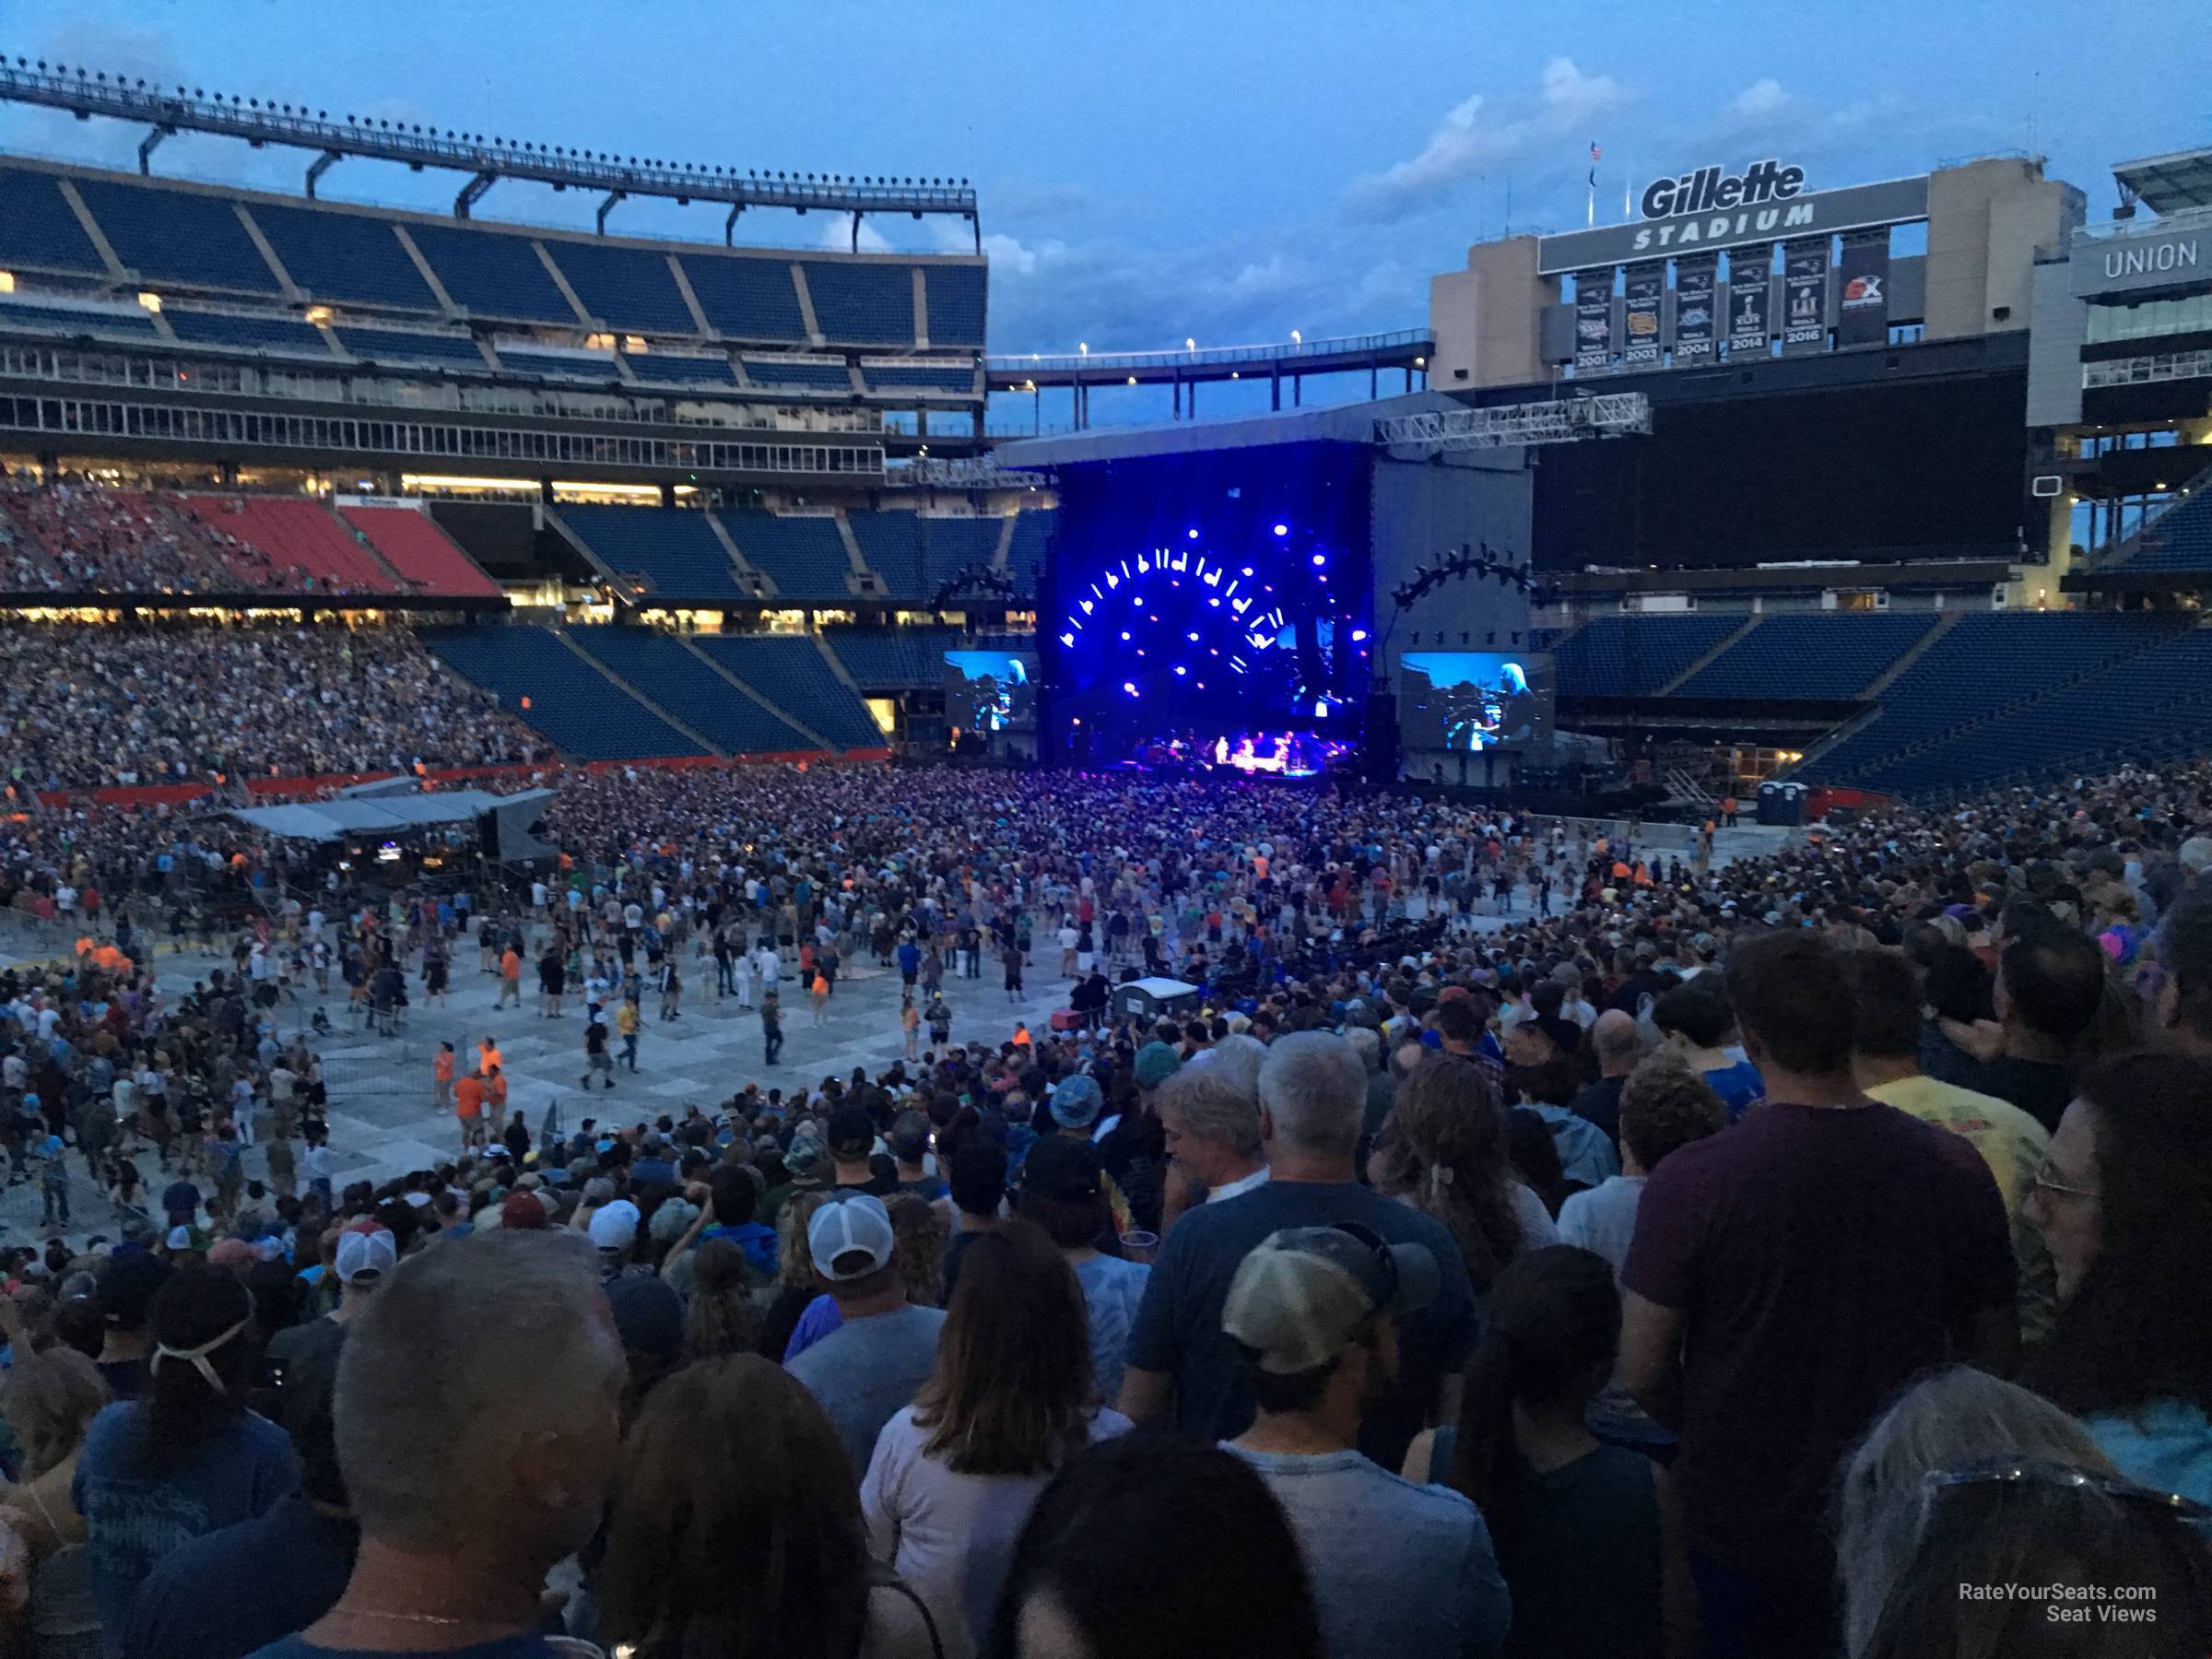 Section 134 at Gillette Stadium for Concerts